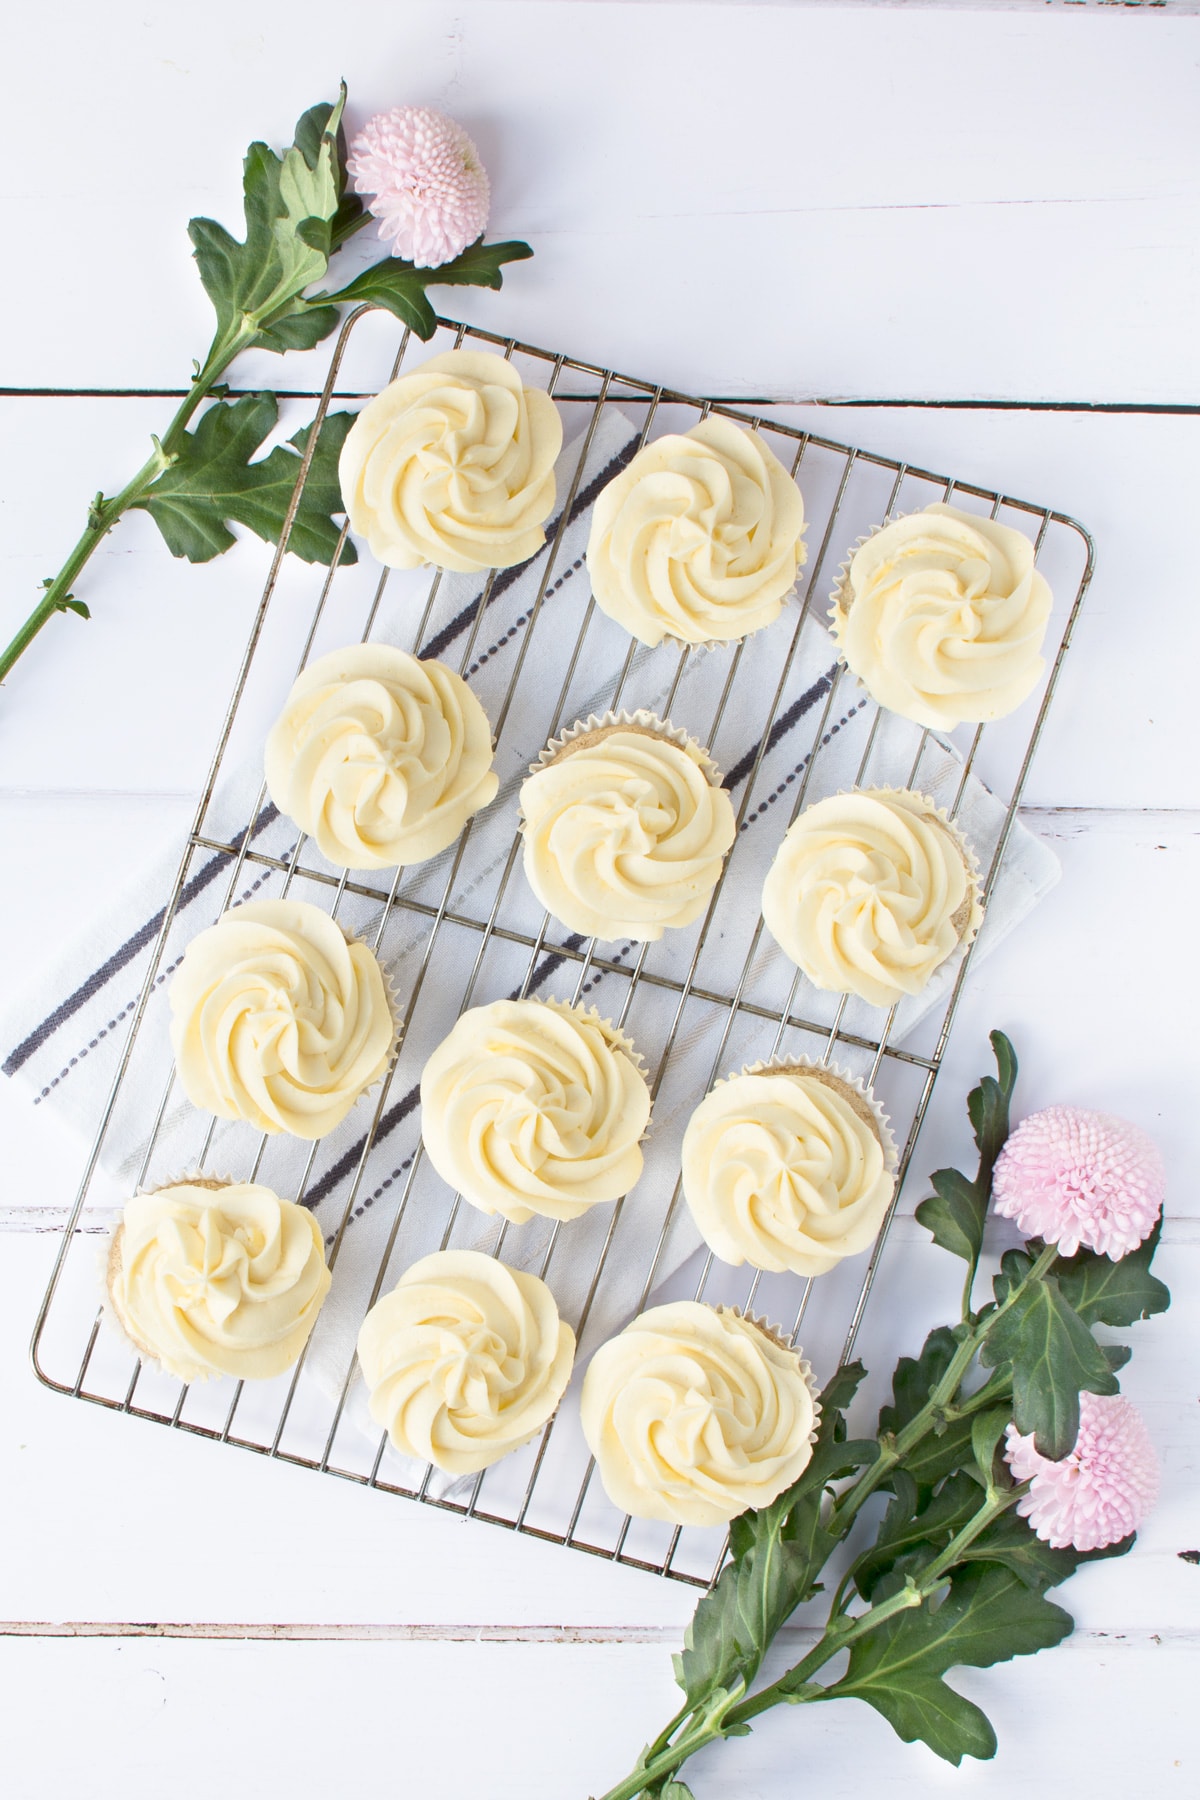 Vegan vanilla buttercream that is simple to make and tastes absolutely delicious.